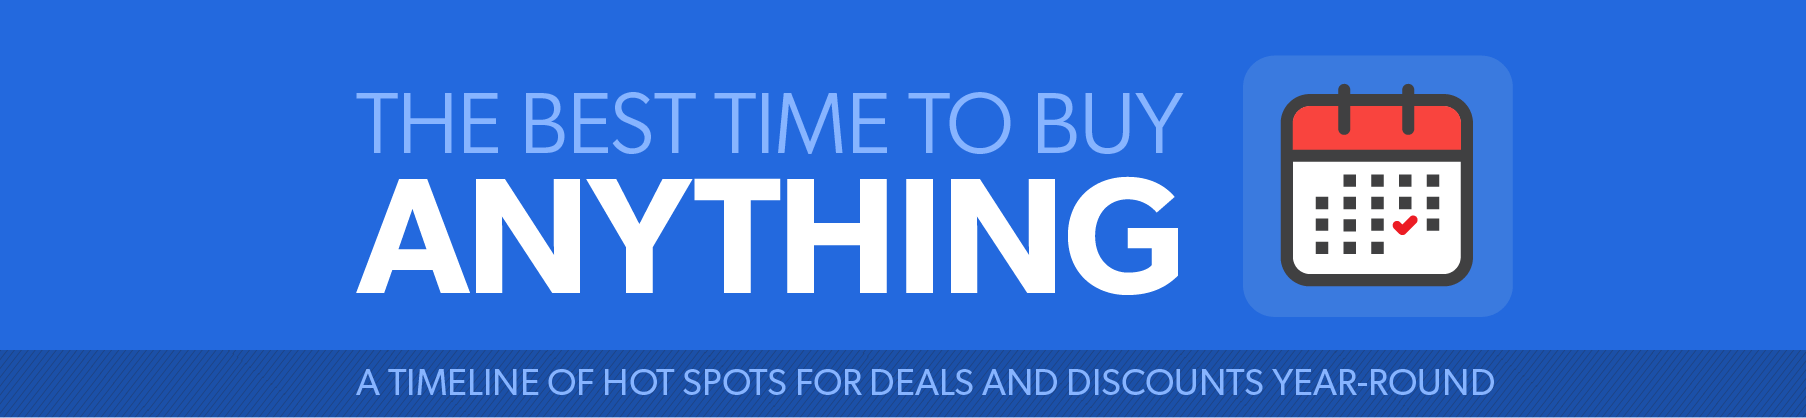 The Best Time To Buy Anything: A Timeline of Hotspots for Deals and Discounts Year-round